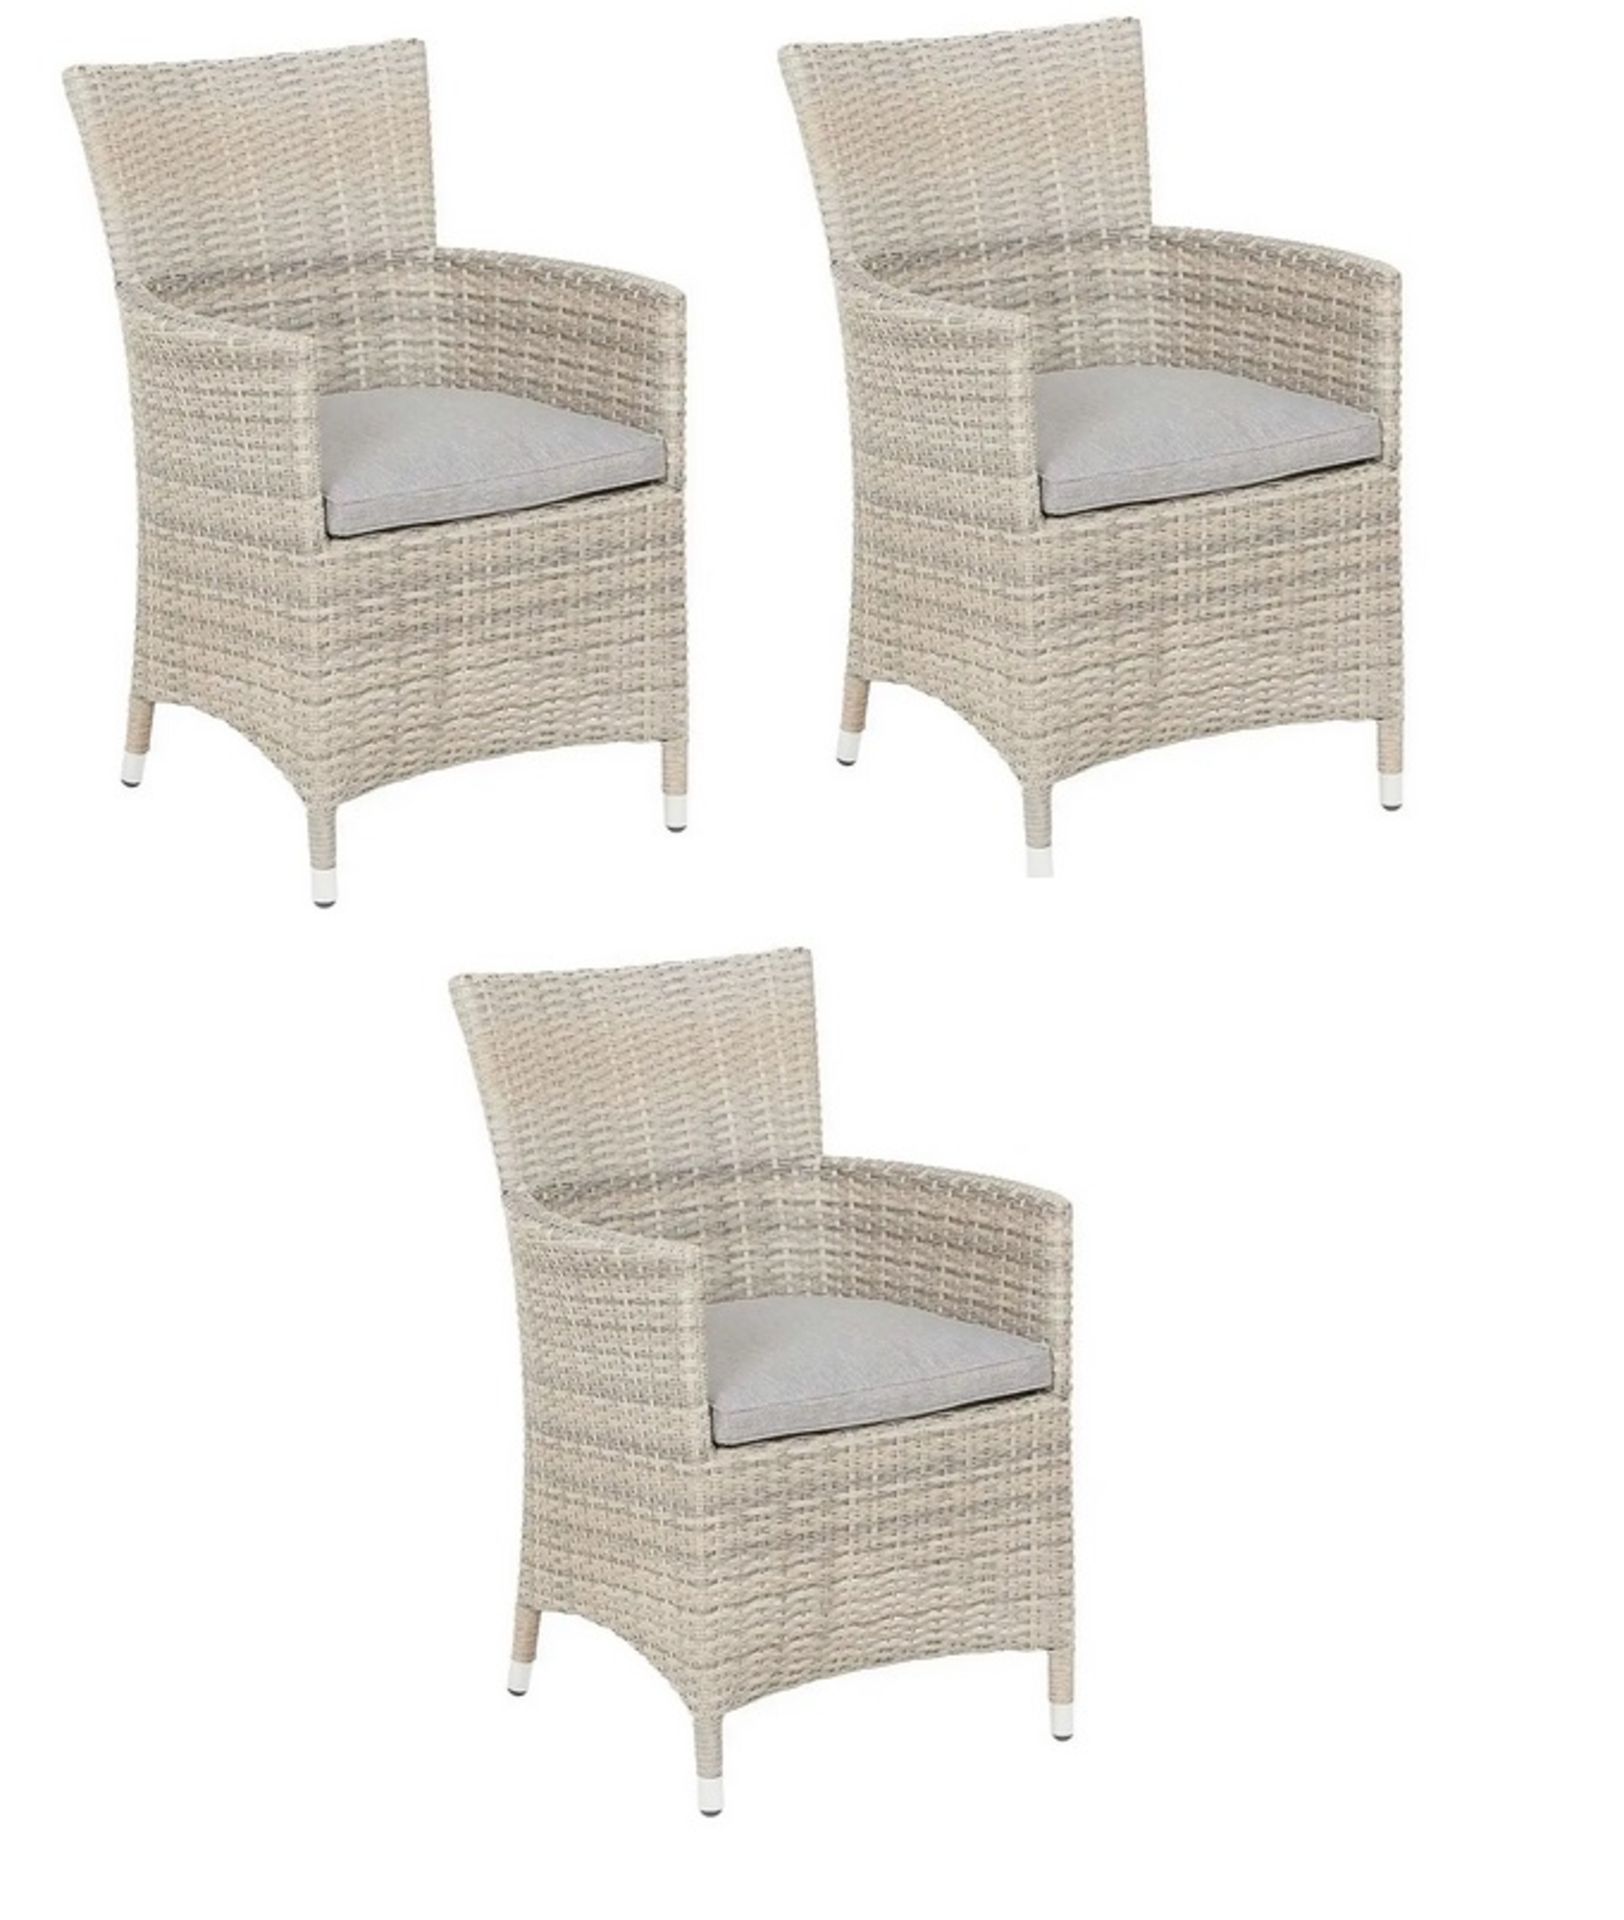 (R16) 3x Hartington Florence Collection Rattan Dining Chair With 4x Cushion.